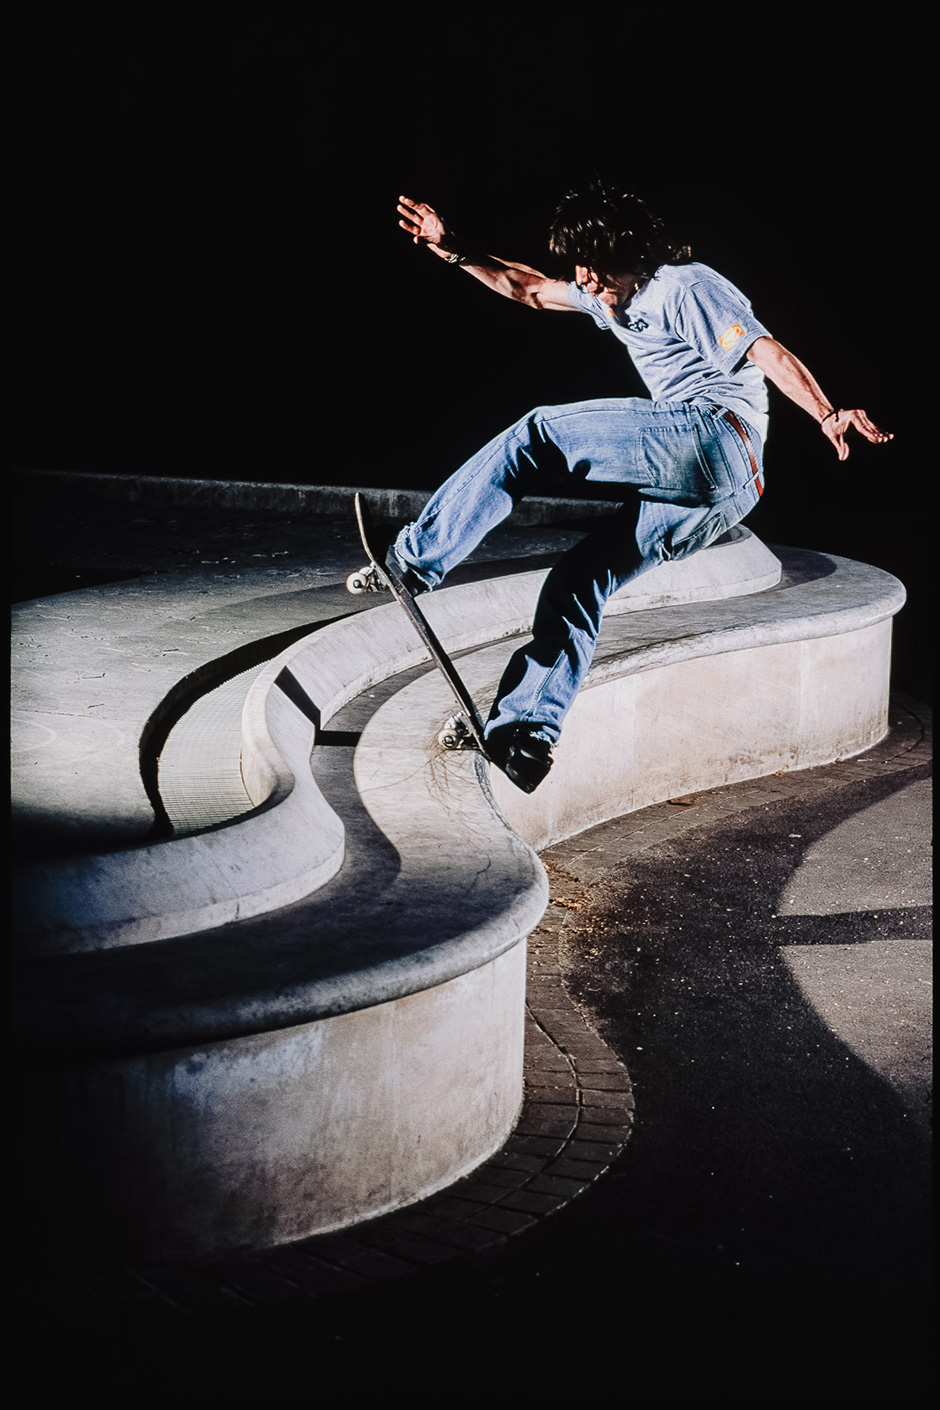 Olly Todd's sinuous frontside bluntslide. Cover of Document July 2002. Photo: Sam Ashley